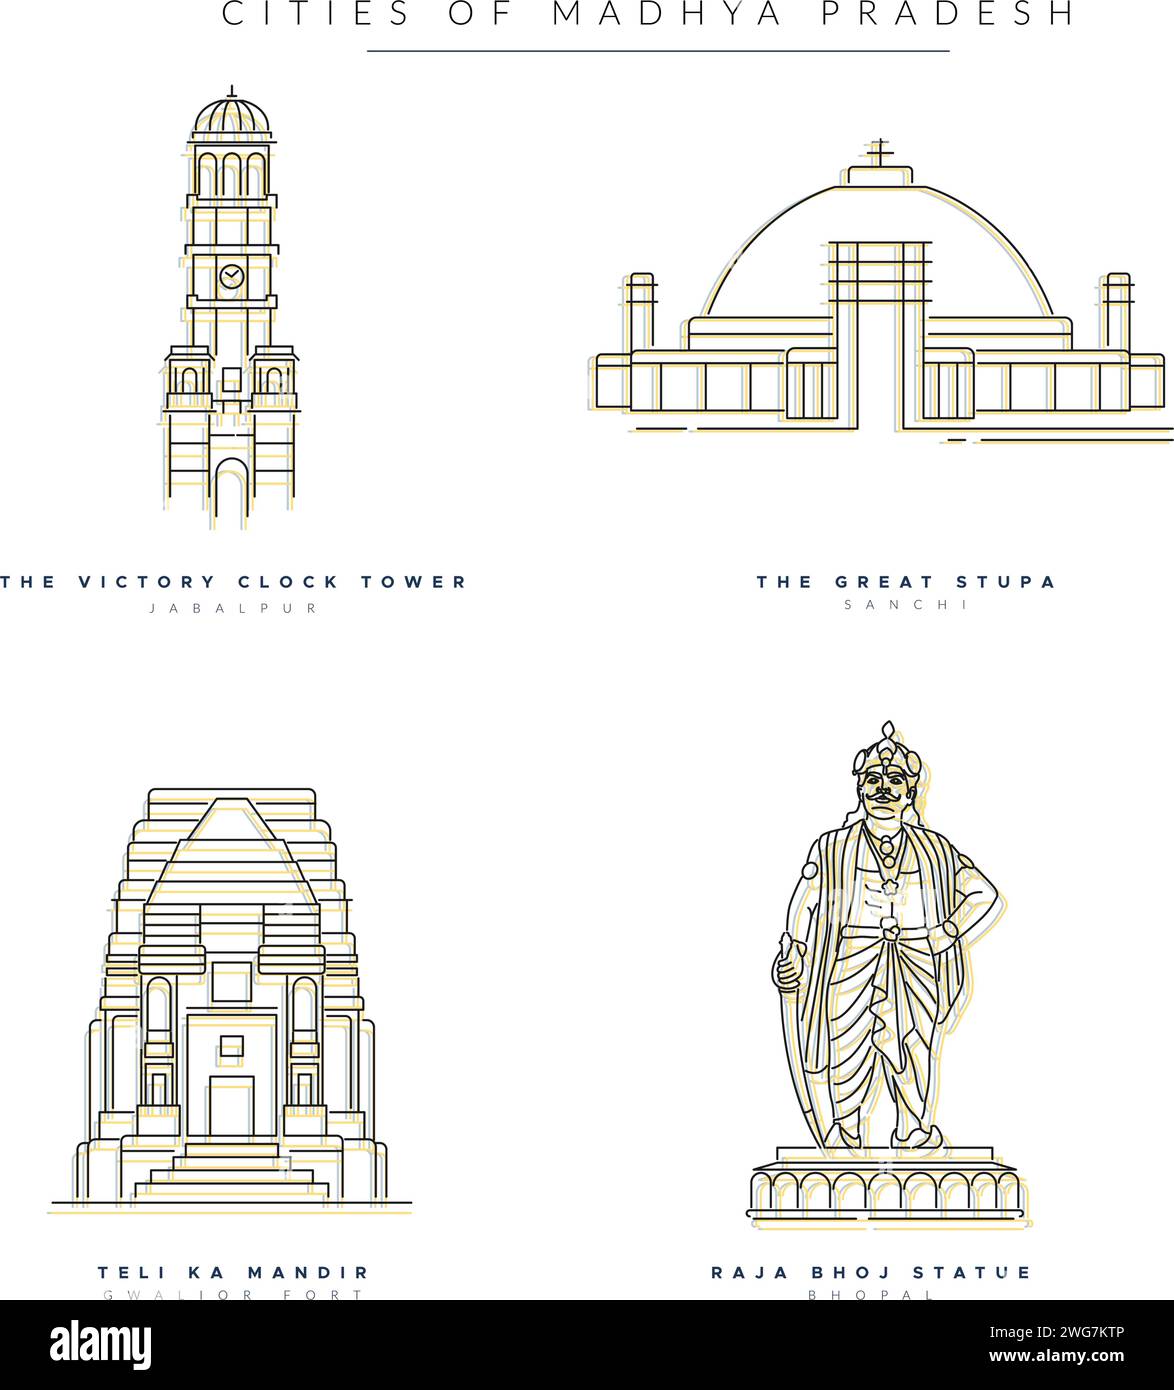 City Master - A Set of Key Indian Cities in Madhya Pradesh -  Icon Illustration as EPS 10 File Stock Vector